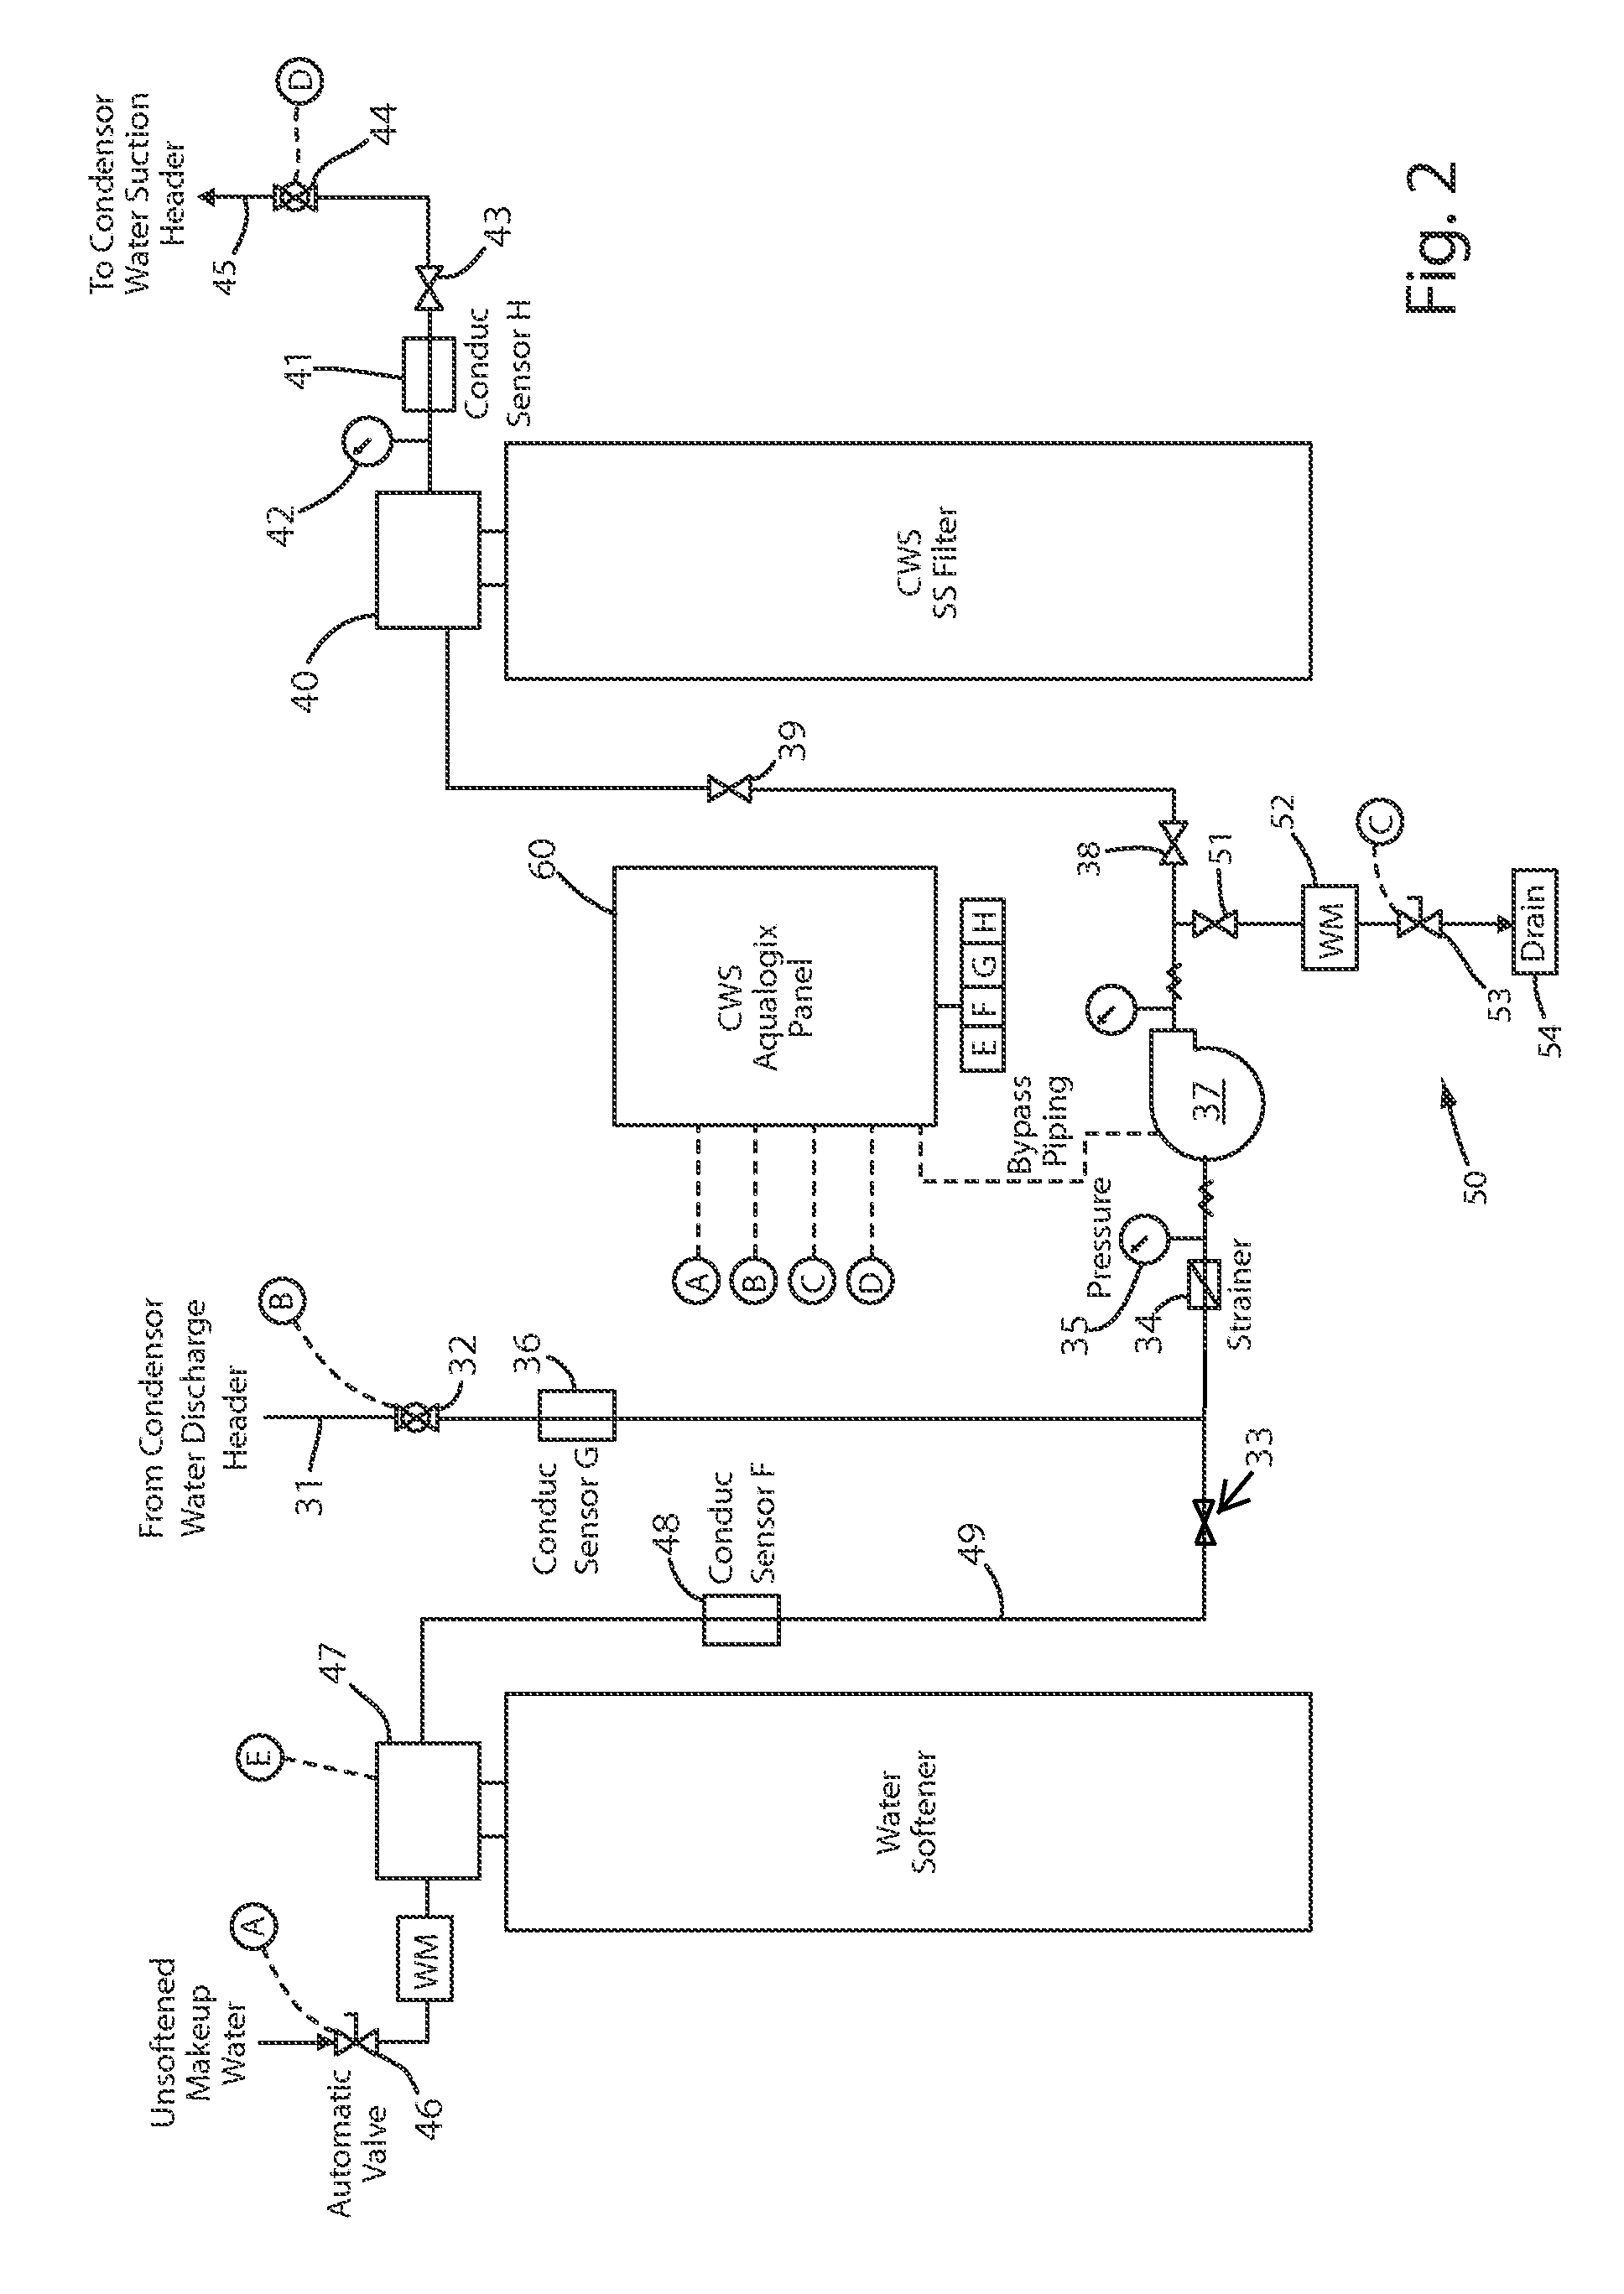 Apparatus Providing Softened Makeup Water for Cooling System